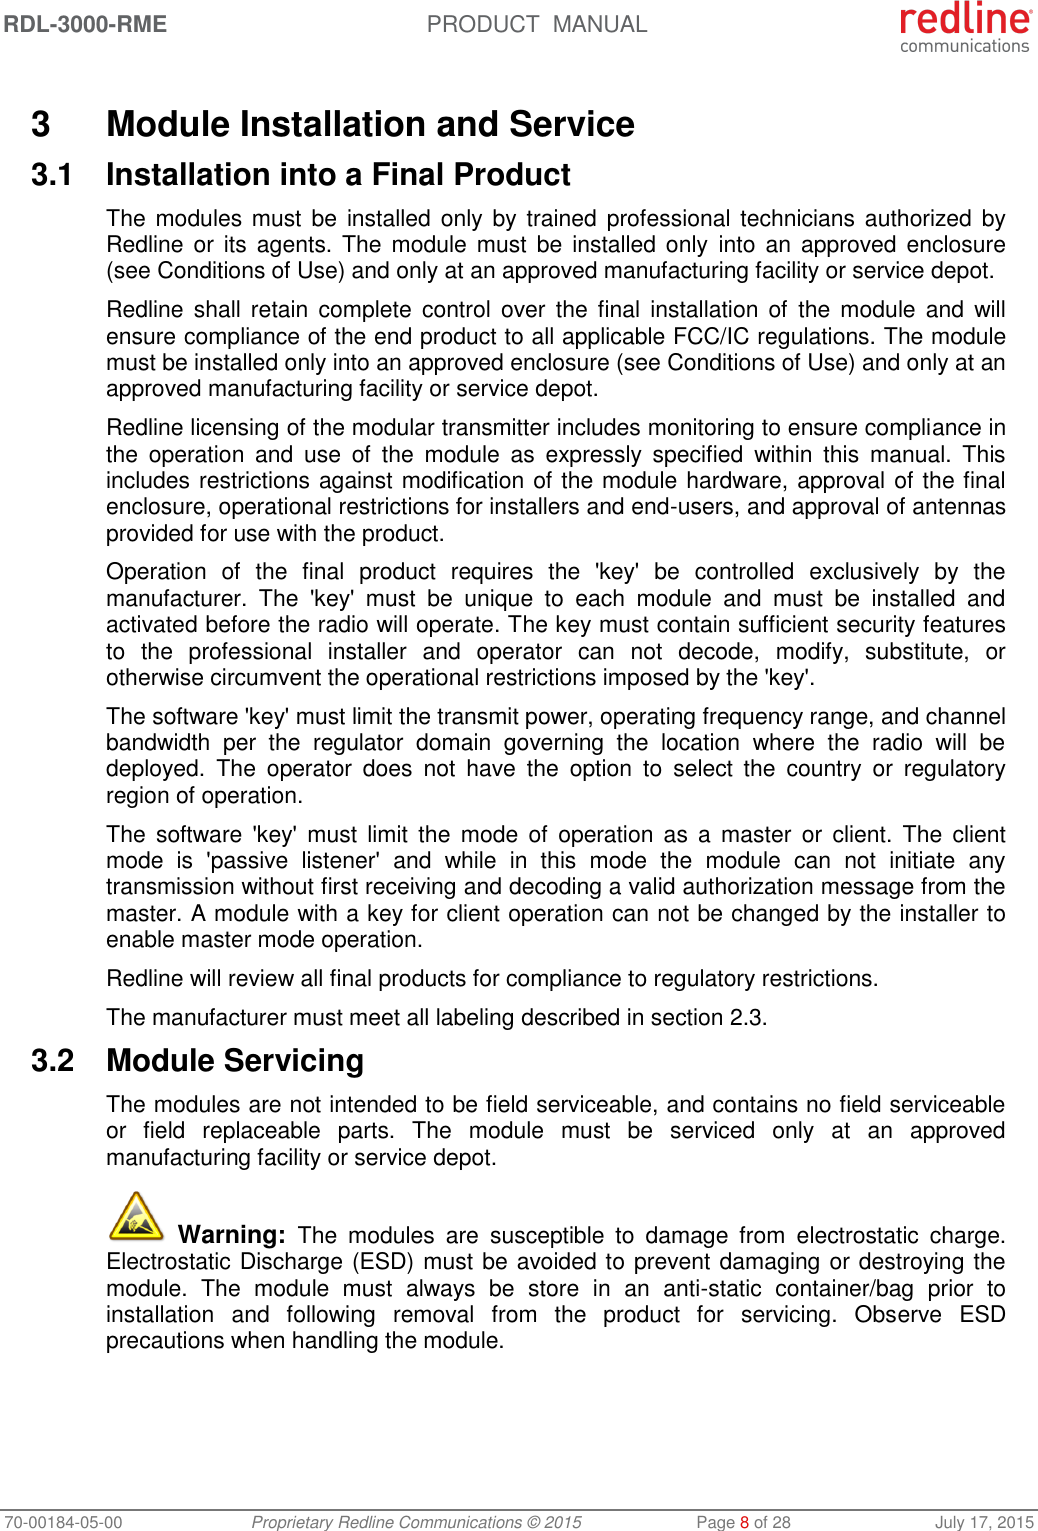 RDL-3000-RME  PRODUCT  MANUAL 70-00184-05-00 Proprietary Redline Communications © 2015  Page 8 of 28  July 17, 2015  3  Module Installation and Service 3.1  Installation into a Final Product The modules must  be  installed  only by trained professional technicians  authorized by Redline or  its  agents. The module must  be  installed only  into  an  approved  enclosure (see Conditions of Use) and only at an approved manufacturing facility or service depot. Redline shall retain  complete  control  over  the final  installation of  the  module  and  will ensure compliance of the end product to all applicable FCC/IC regulations. The module must be installed only into an approved enclosure (see Conditions of Use) and only at an approved manufacturing facility or service depot. Redline licensing of the modular transmitter includes monitoring to ensure compliance in the  operation  and  use  of  the  module  as  expressly  specified  within  this  manual.  This includes restrictions against modification of the module hardware, approval of the final enclosure, operational restrictions for installers and end-users, and approval of antennas provided for use with the product. Operation  of  the  final  product  requires  the  &apos;key&apos;  be  controlled  exclusively  by  the manufacturer.  The  &apos;key&apos;  must  be  unique  to  each  module  and  must  be  installed  and activated before the radio will operate. The key must contain sufficient security features to  the  professional  installer  and  operator  can  not  decode,  modify,  substitute,  or otherwise circumvent the operational restrictions imposed by the &apos;key&apos;.  The software &apos;key&apos; must limit the transmit power, operating frequency range, and channel bandwidth  per  the  regulator  domain  governing  the  location  where  the  radio  will  be deployed.  The  operator  does  not  have  the  option  to  select  the  country  or  regulatory region of operation. The  software &apos;key&apos;  must  limit  the  mode  of  operation as  a  master  or  client.  The  client mode  is  &apos;passive  listener&apos;  and  while  in  this  mode  the  module  can  not  initiate  any transmission without first receiving and decoding a valid authorization message from the master. A module with a key for client operation can not be changed by the installer to enable master mode operation. Redline will review all final products for compliance to regulatory restrictions. The manufacturer must meet all labeling described in section 2.3. 3.2  Module Servicing The modules are not intended to be field serviceable, and contains no field serviceable or  field  replaceable  parts.  The  module  must  be  serviced  only  at  an  approved manufacturing facility or service depot.  Warning:  The  modules  are  susceptible  to  damage  from  electrostatic  charge. Electrostatic Discharge (ESD) must be avoided to prevent damaging or destroying the module.  The  module  must  always  be  store  in  an  anti-static  container/bag  prior  to installation  and  following  removal  from  the  product  for  servicing.  Observe  ESD precautions when handling the module. 